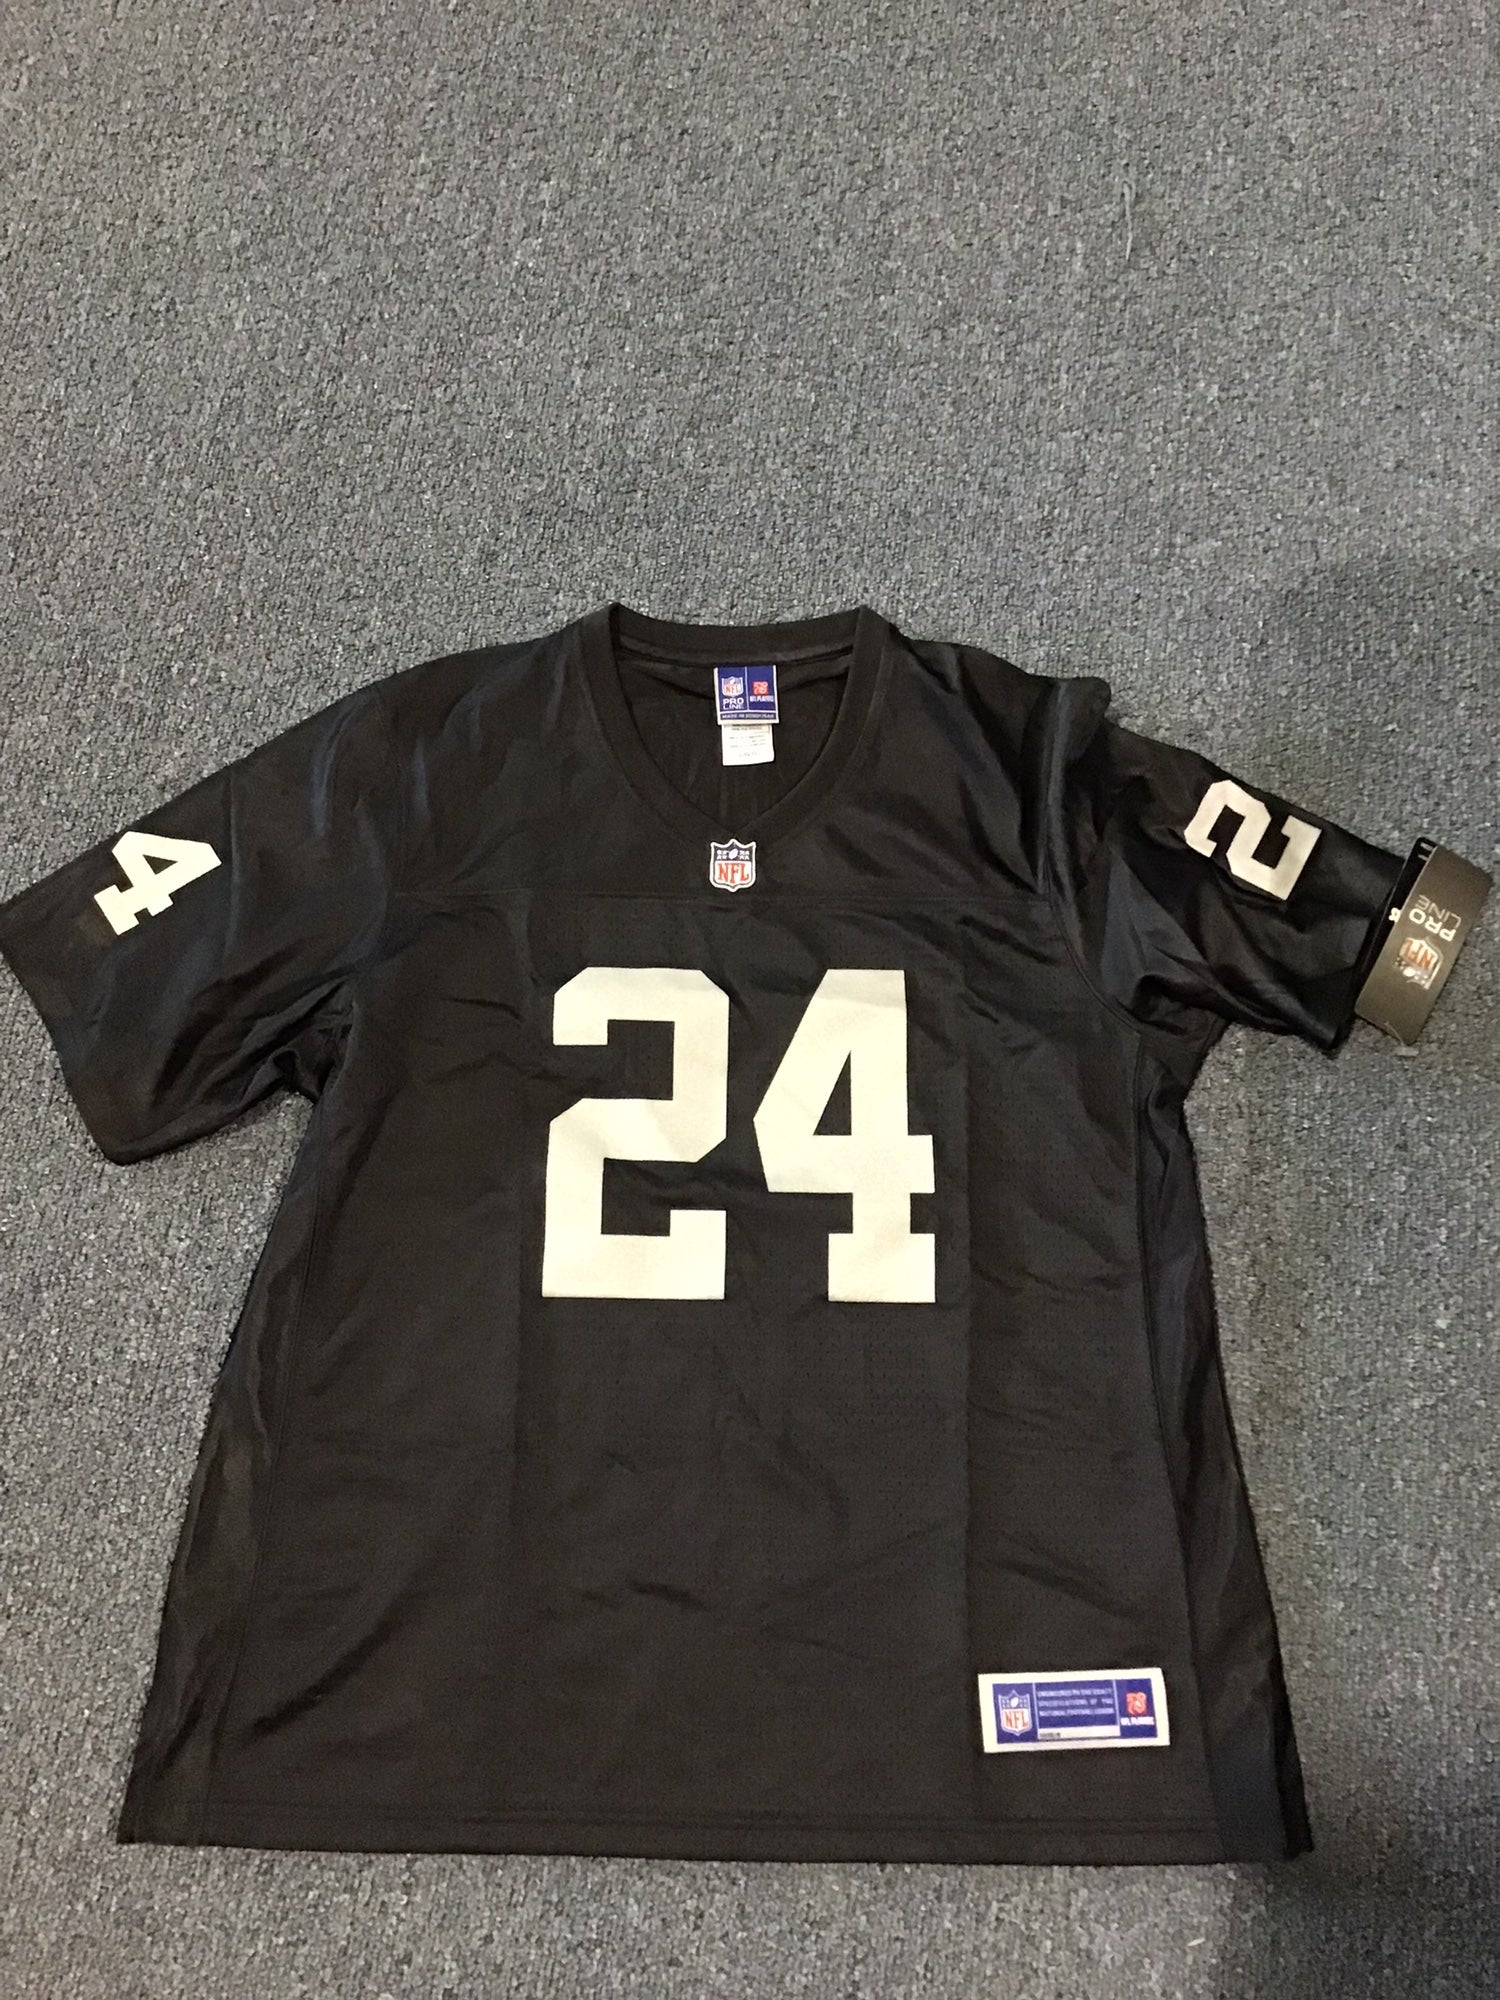 raiders jersey number 24